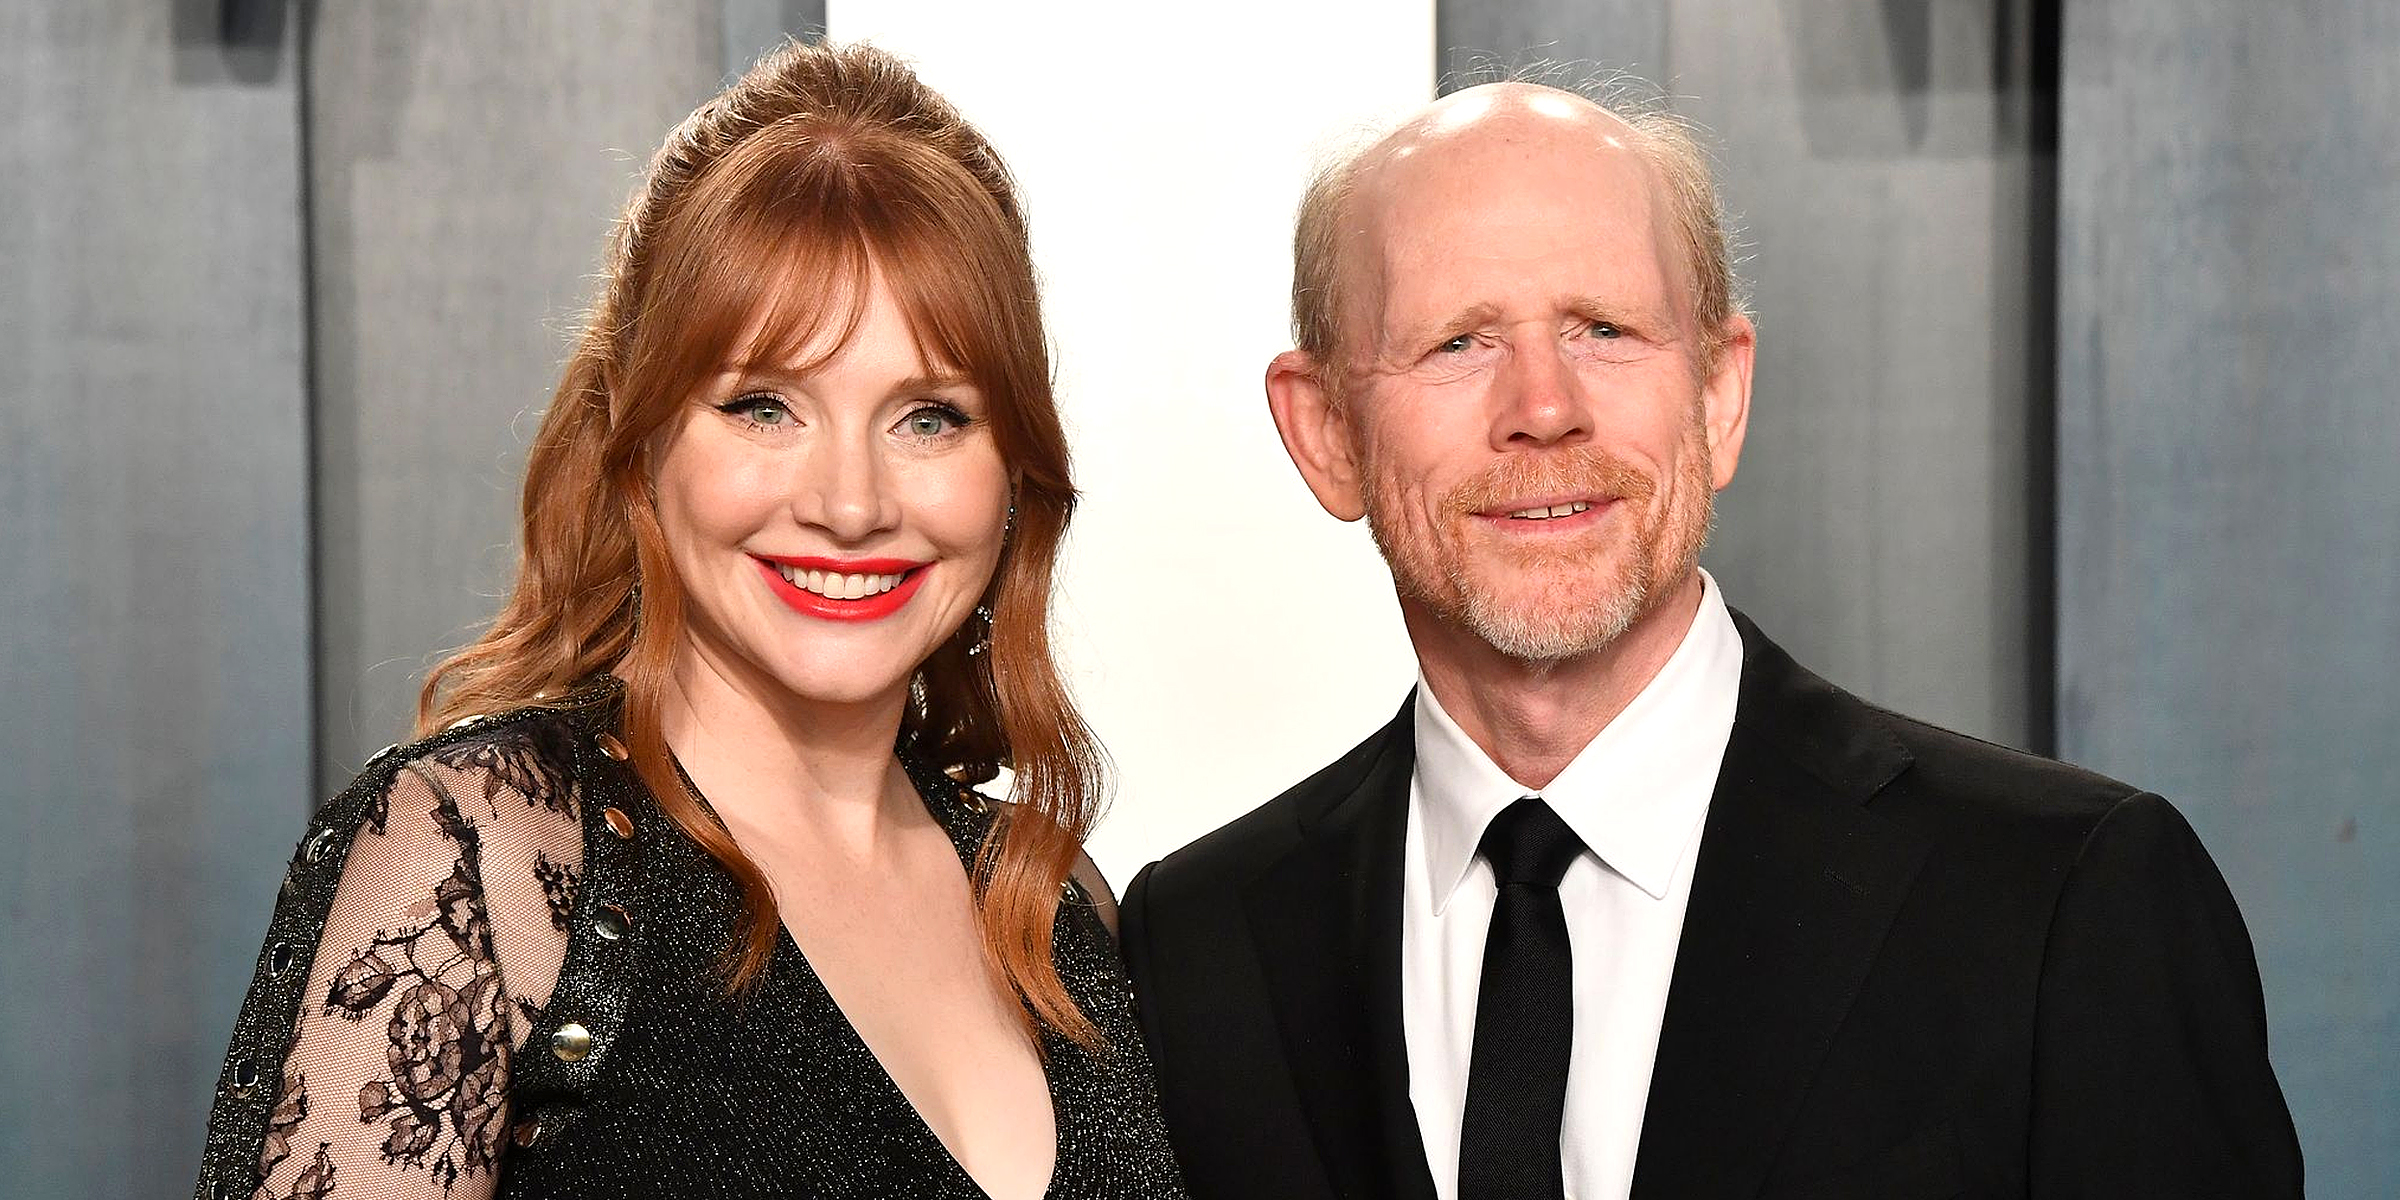 Bryce Dallas Howard Raises 2 Kids with Husband She Met 22 Years Ago - Inside Their LA Home Full of Plants